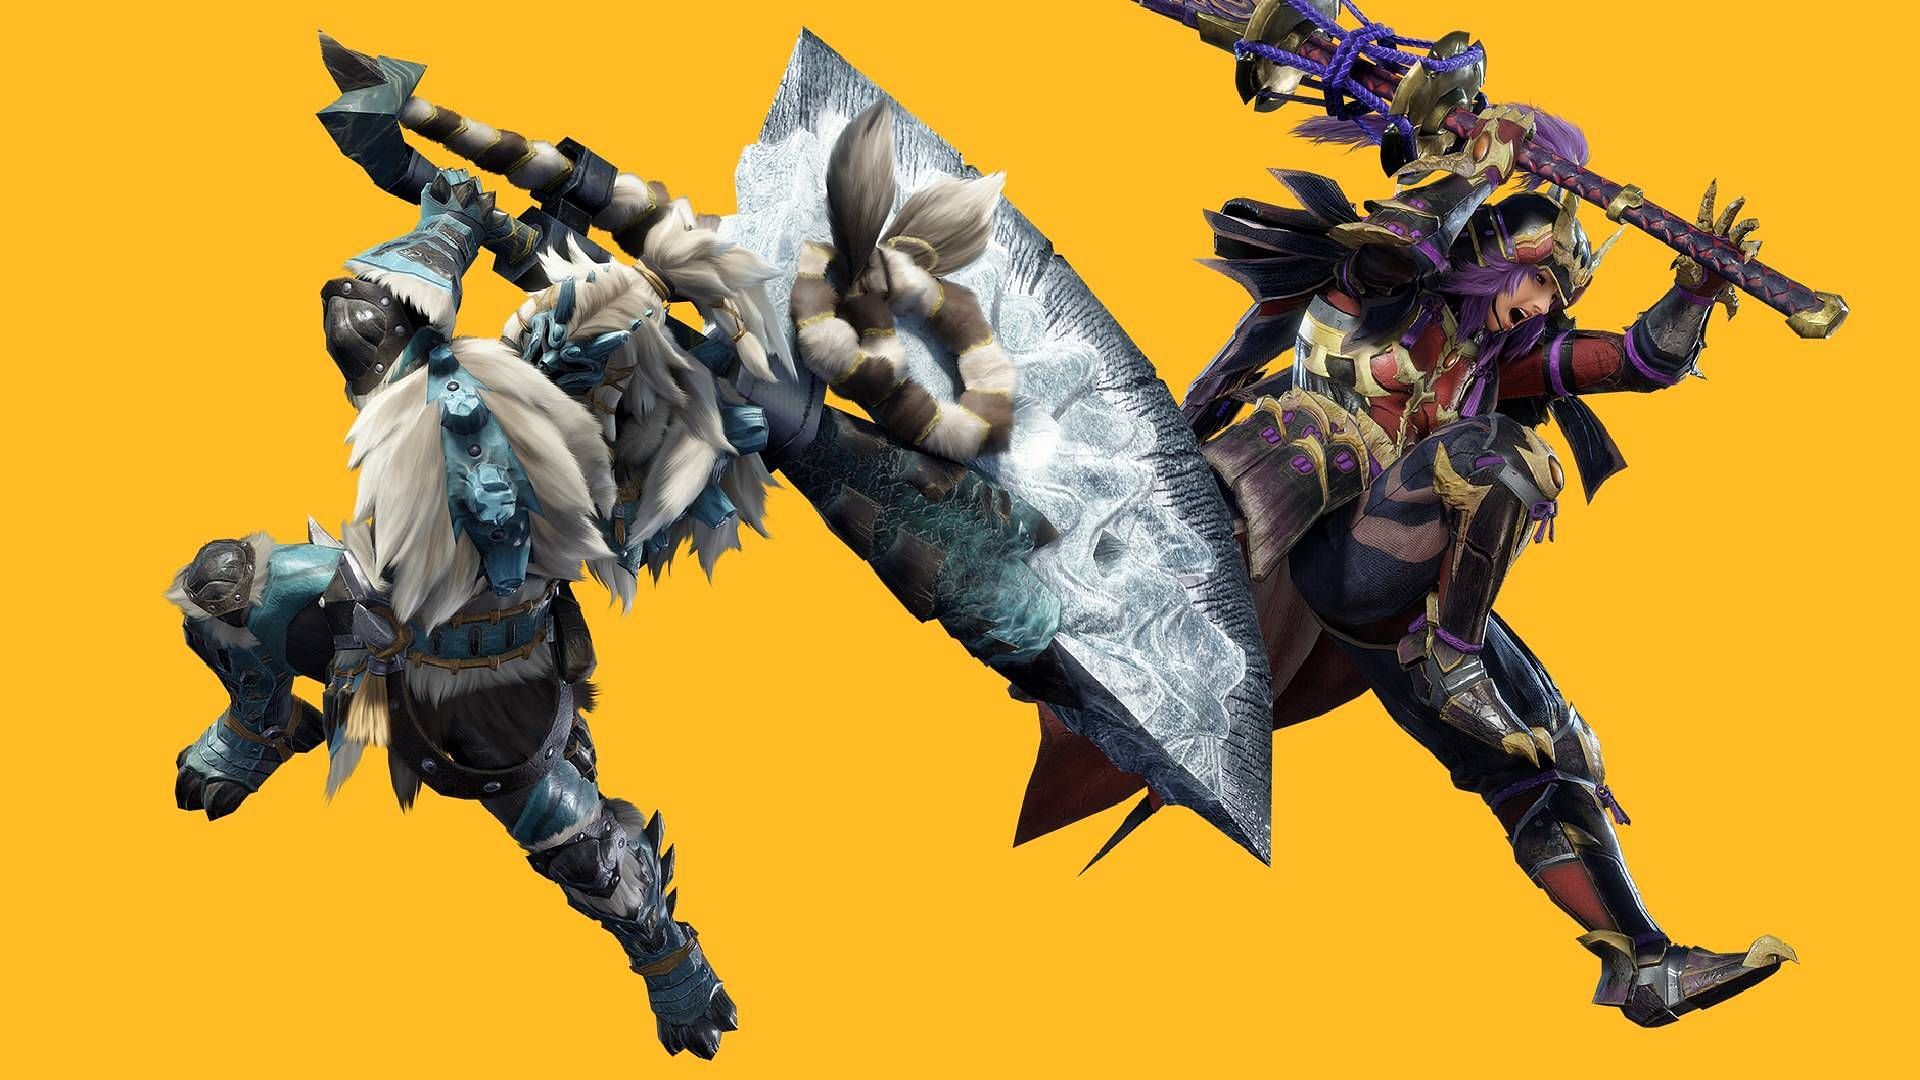 How to unlock new weapon types in Monster Hunter Now